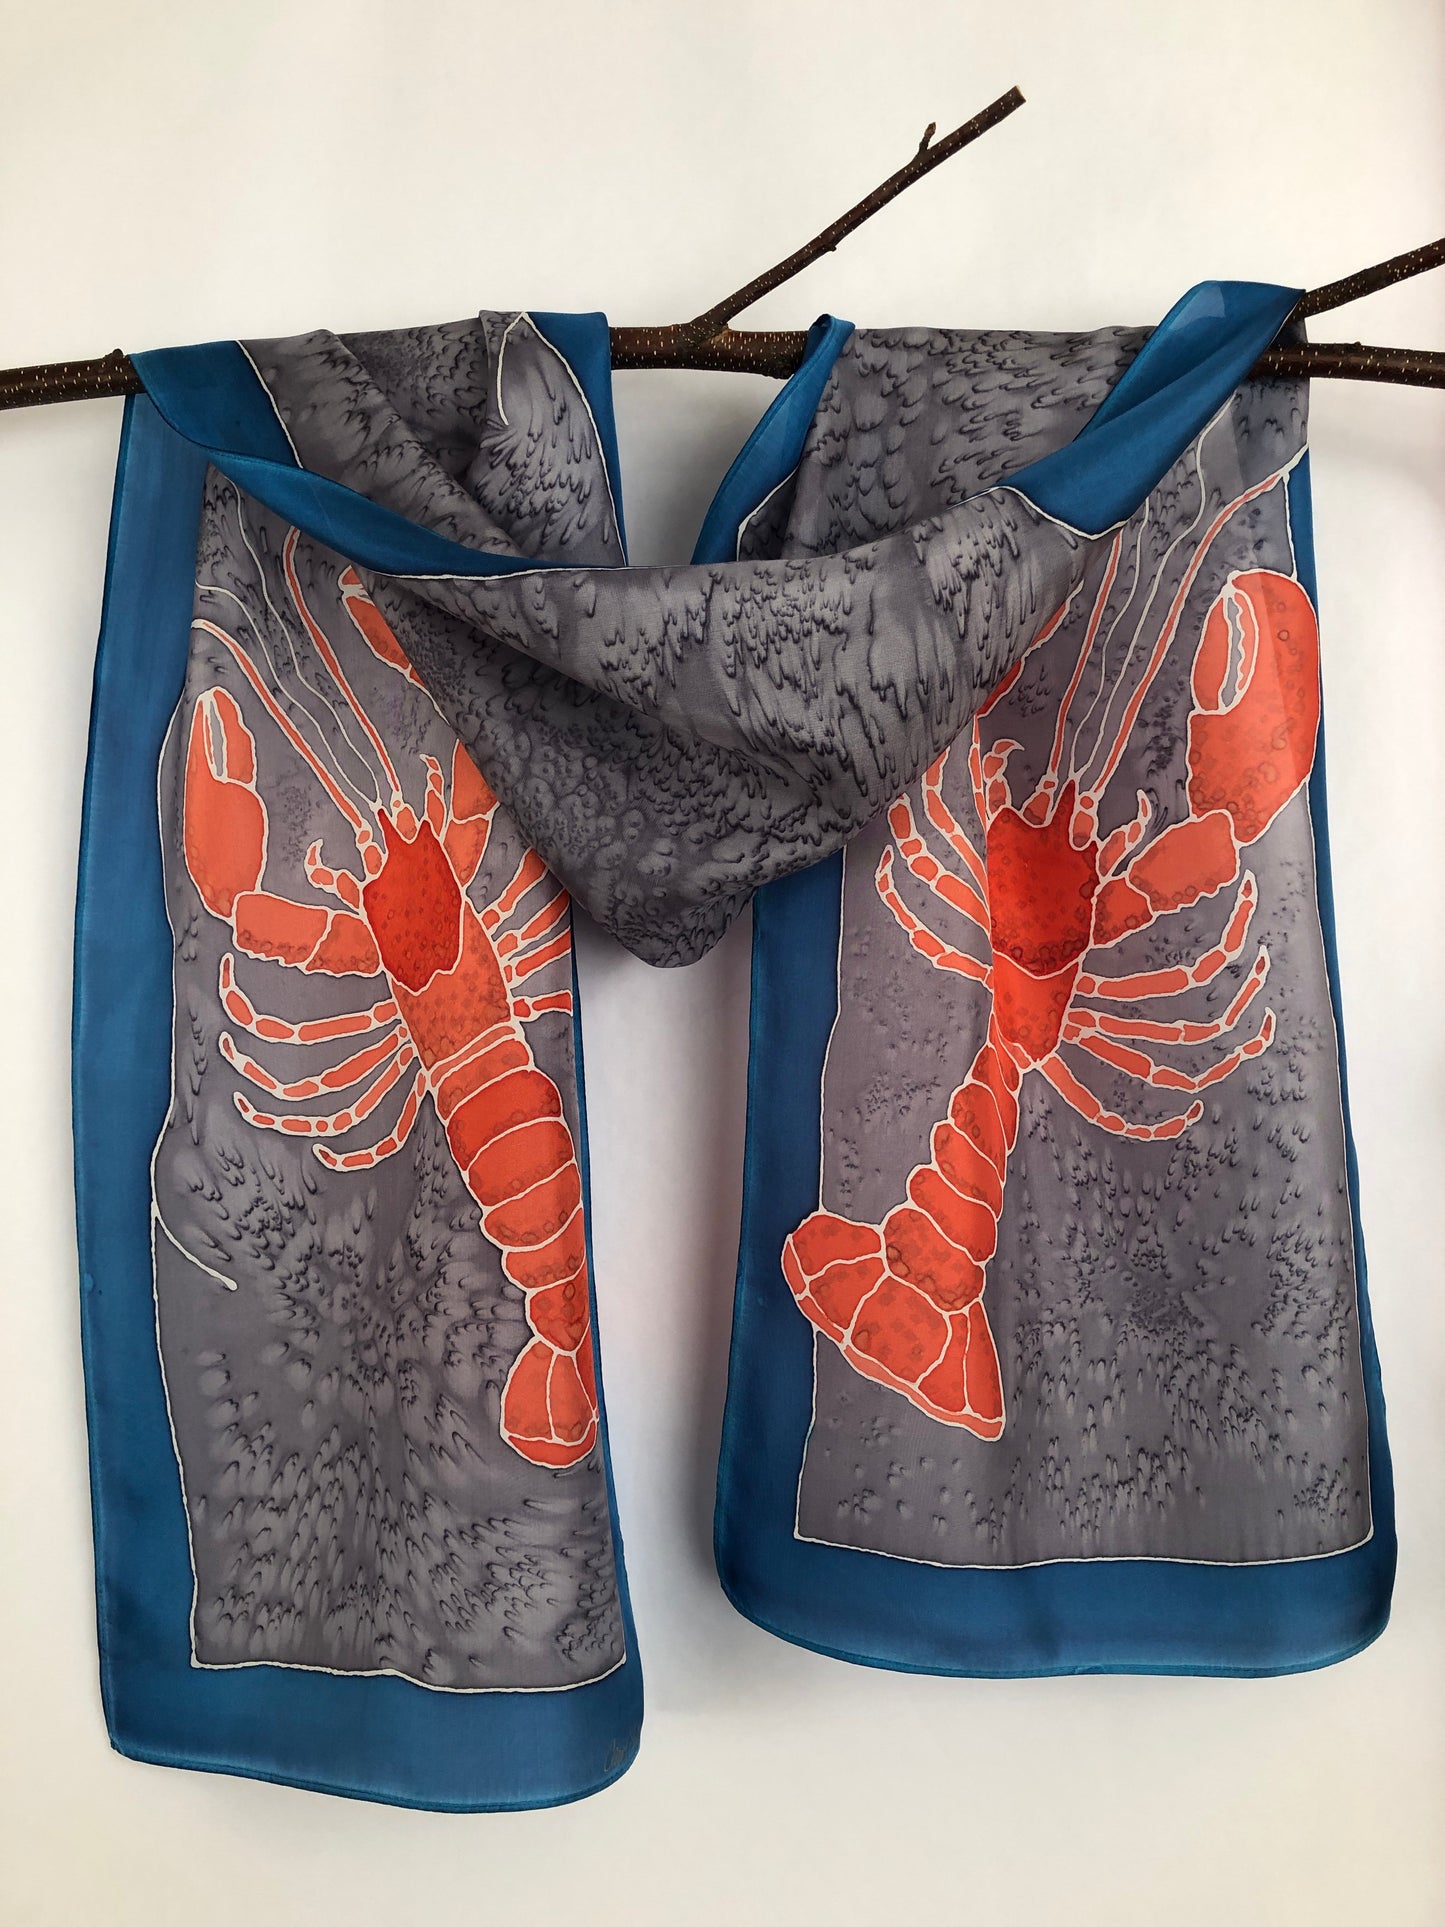 "Love Maine Lobster v1" - Hand-dyed Silk Scarf - $125